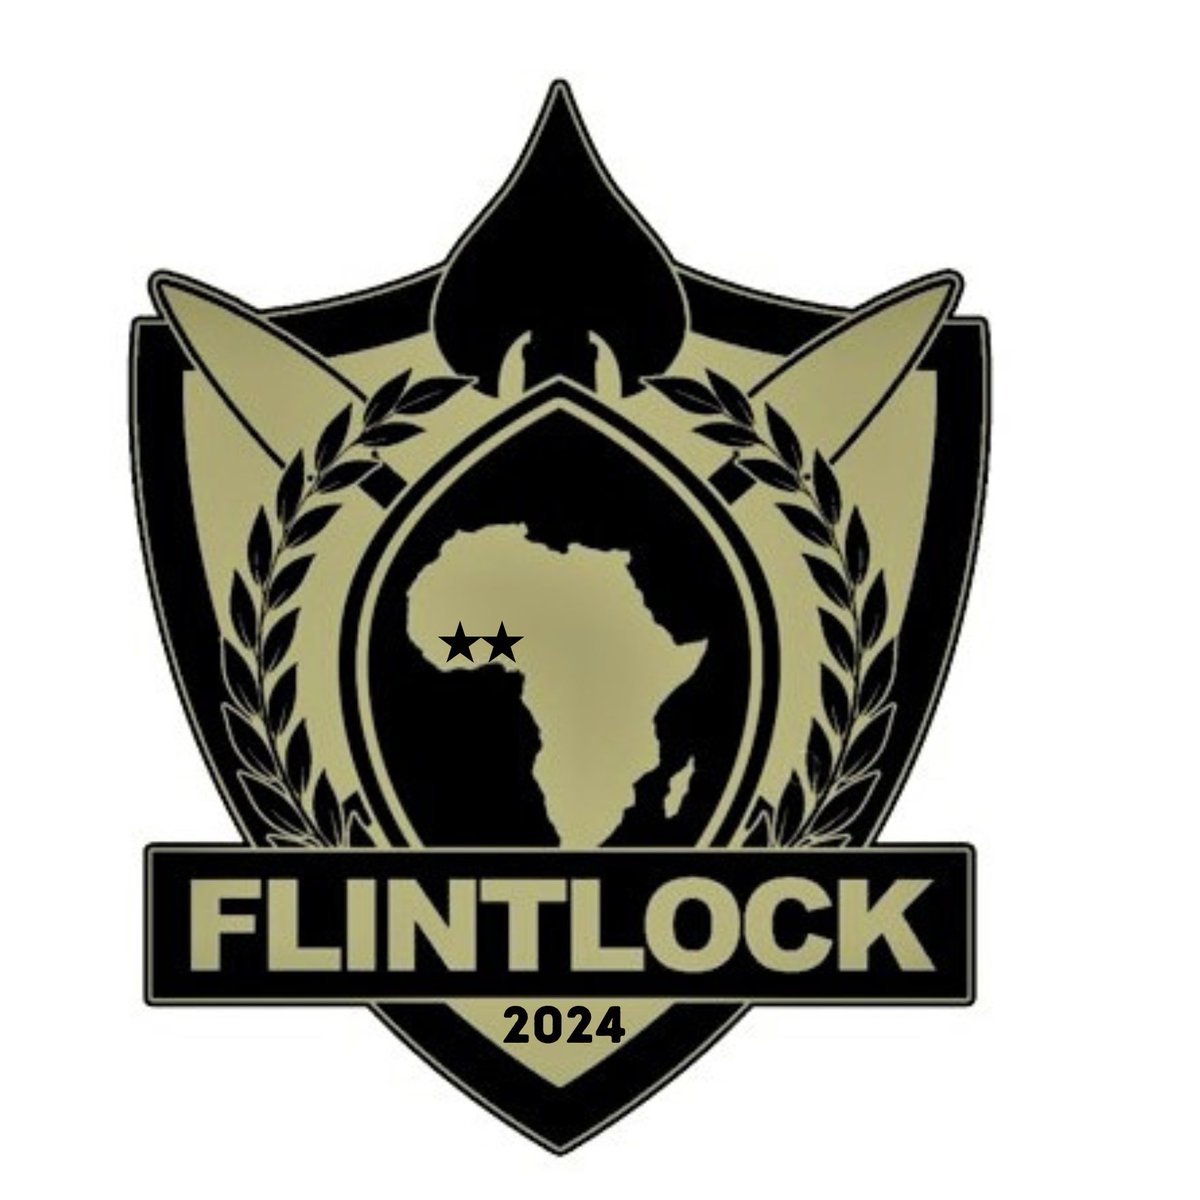 .@USAfricaCommand's premier special operations forces exercise commences today through May 24th. #Flintlock24 aims to strengthen key partner forces collaboration throughout #Africa, in conjunction with the U.S. & international SOF community.